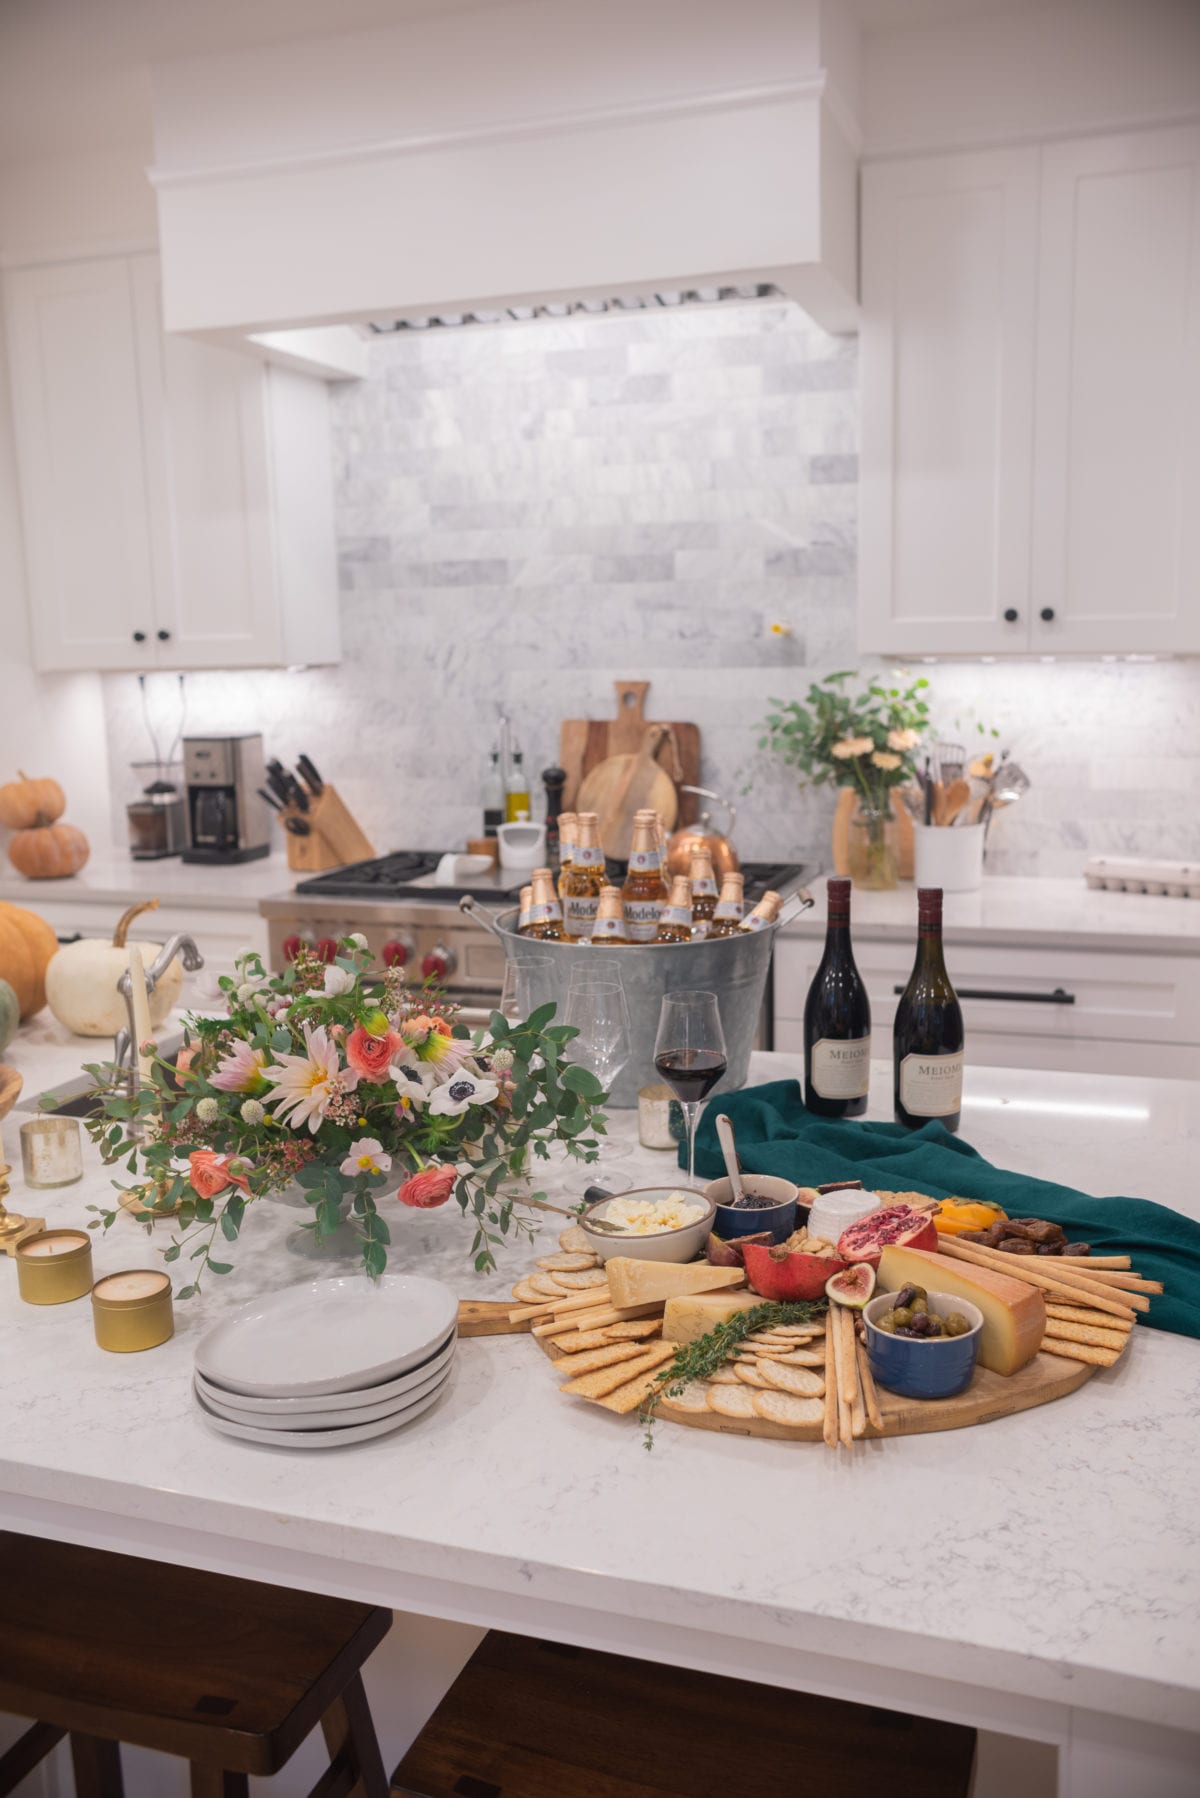 Holiday Entertaining with Meiomi and Modelo